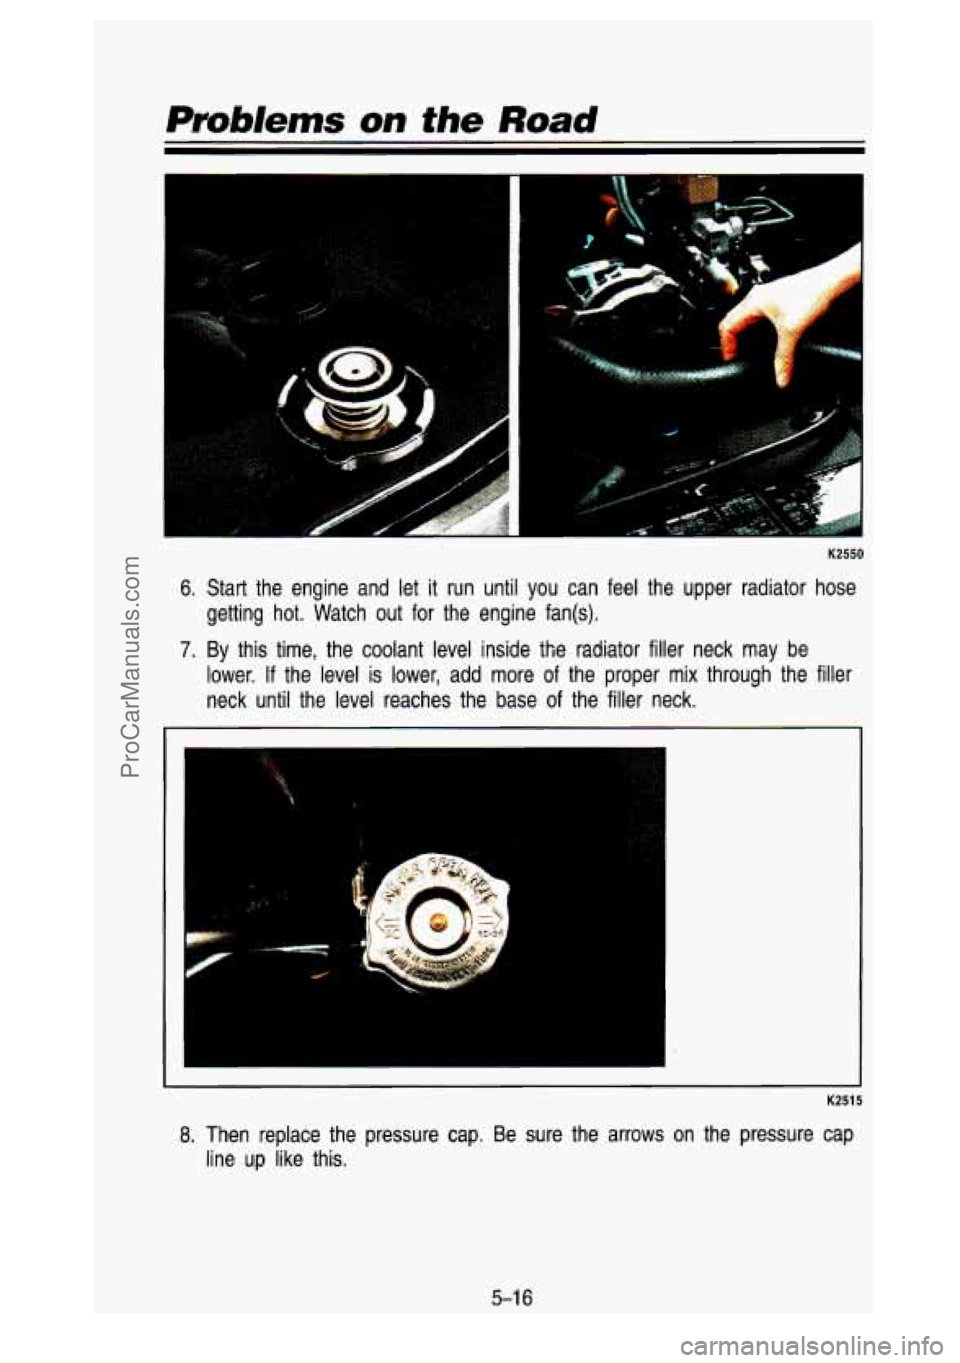 GMC SIERRA 1993  Owners Manual Prob/ems on the Road 
t 
e; 
K2550 
6. Start  the  engine  and  let it run  until  you  can  feel  the  upper  radiator  hose 
getting  hot.  Watch  out  for  the  engine  fan(s). 
7. By this  time,  